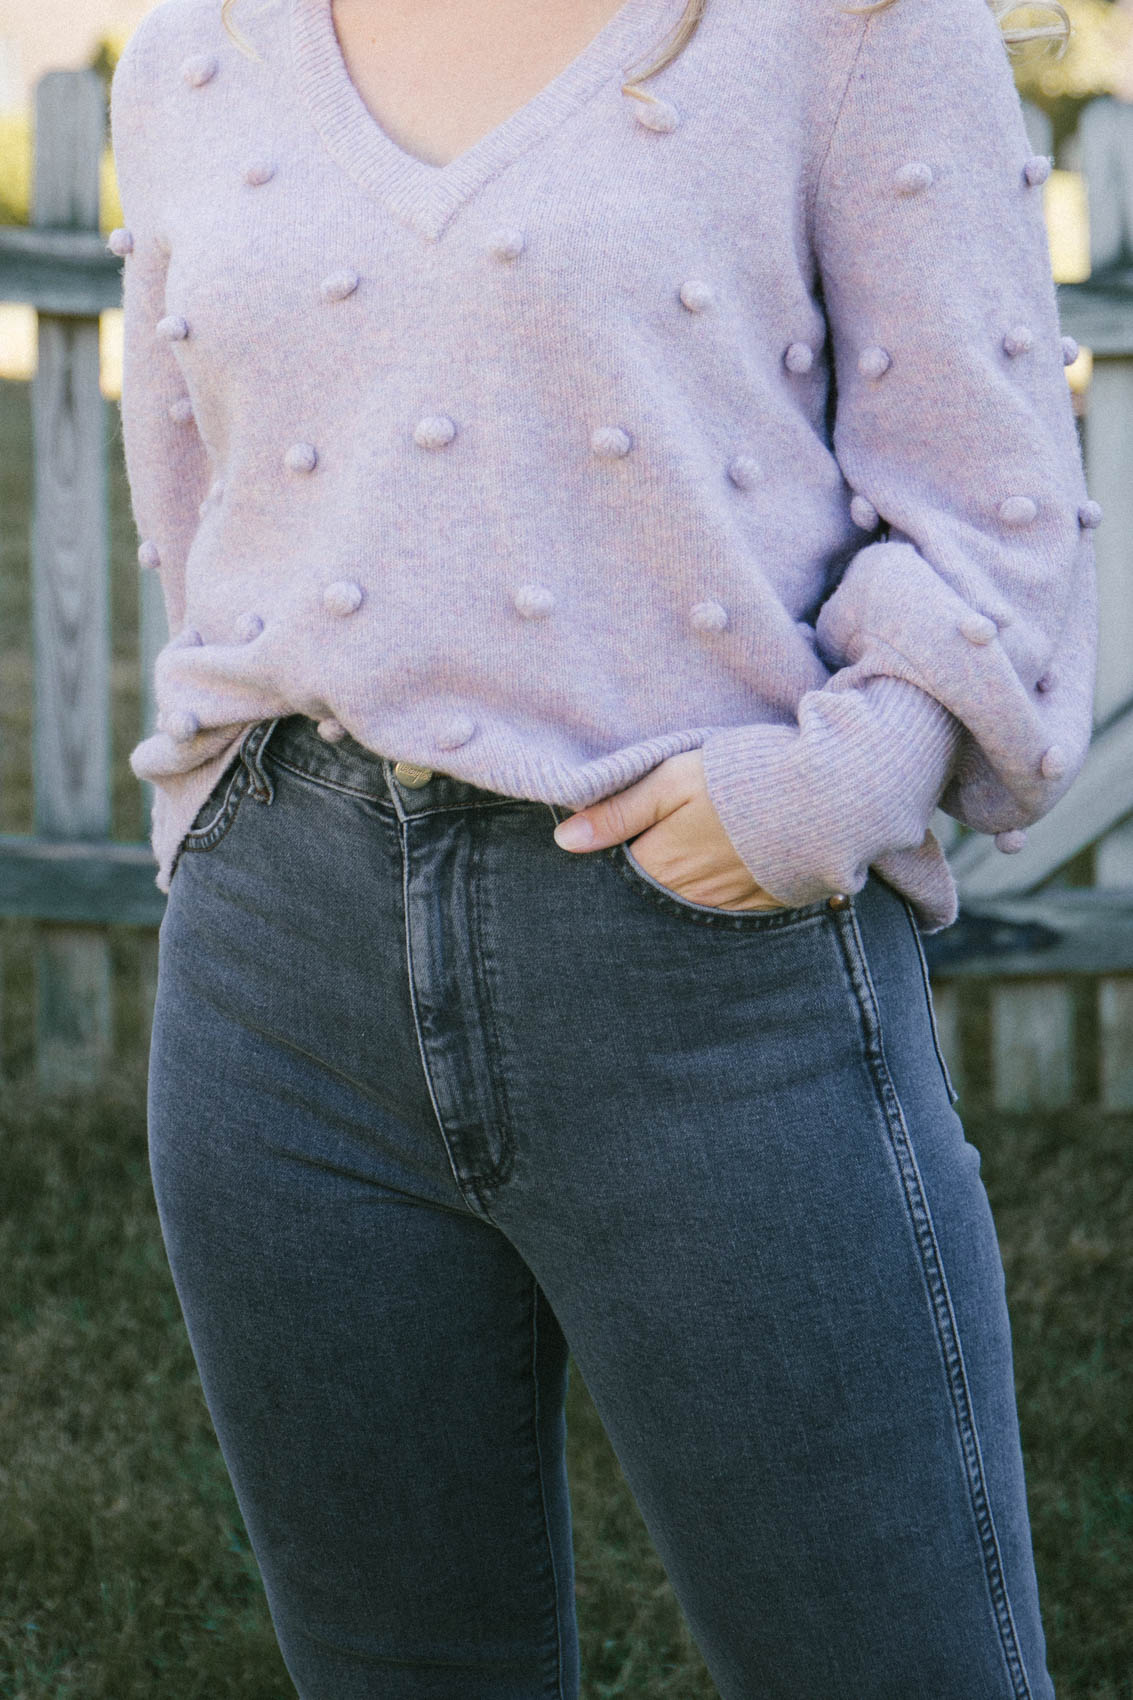 Wrangler Icons 11wwz Jeans Review - Allyn Lewis